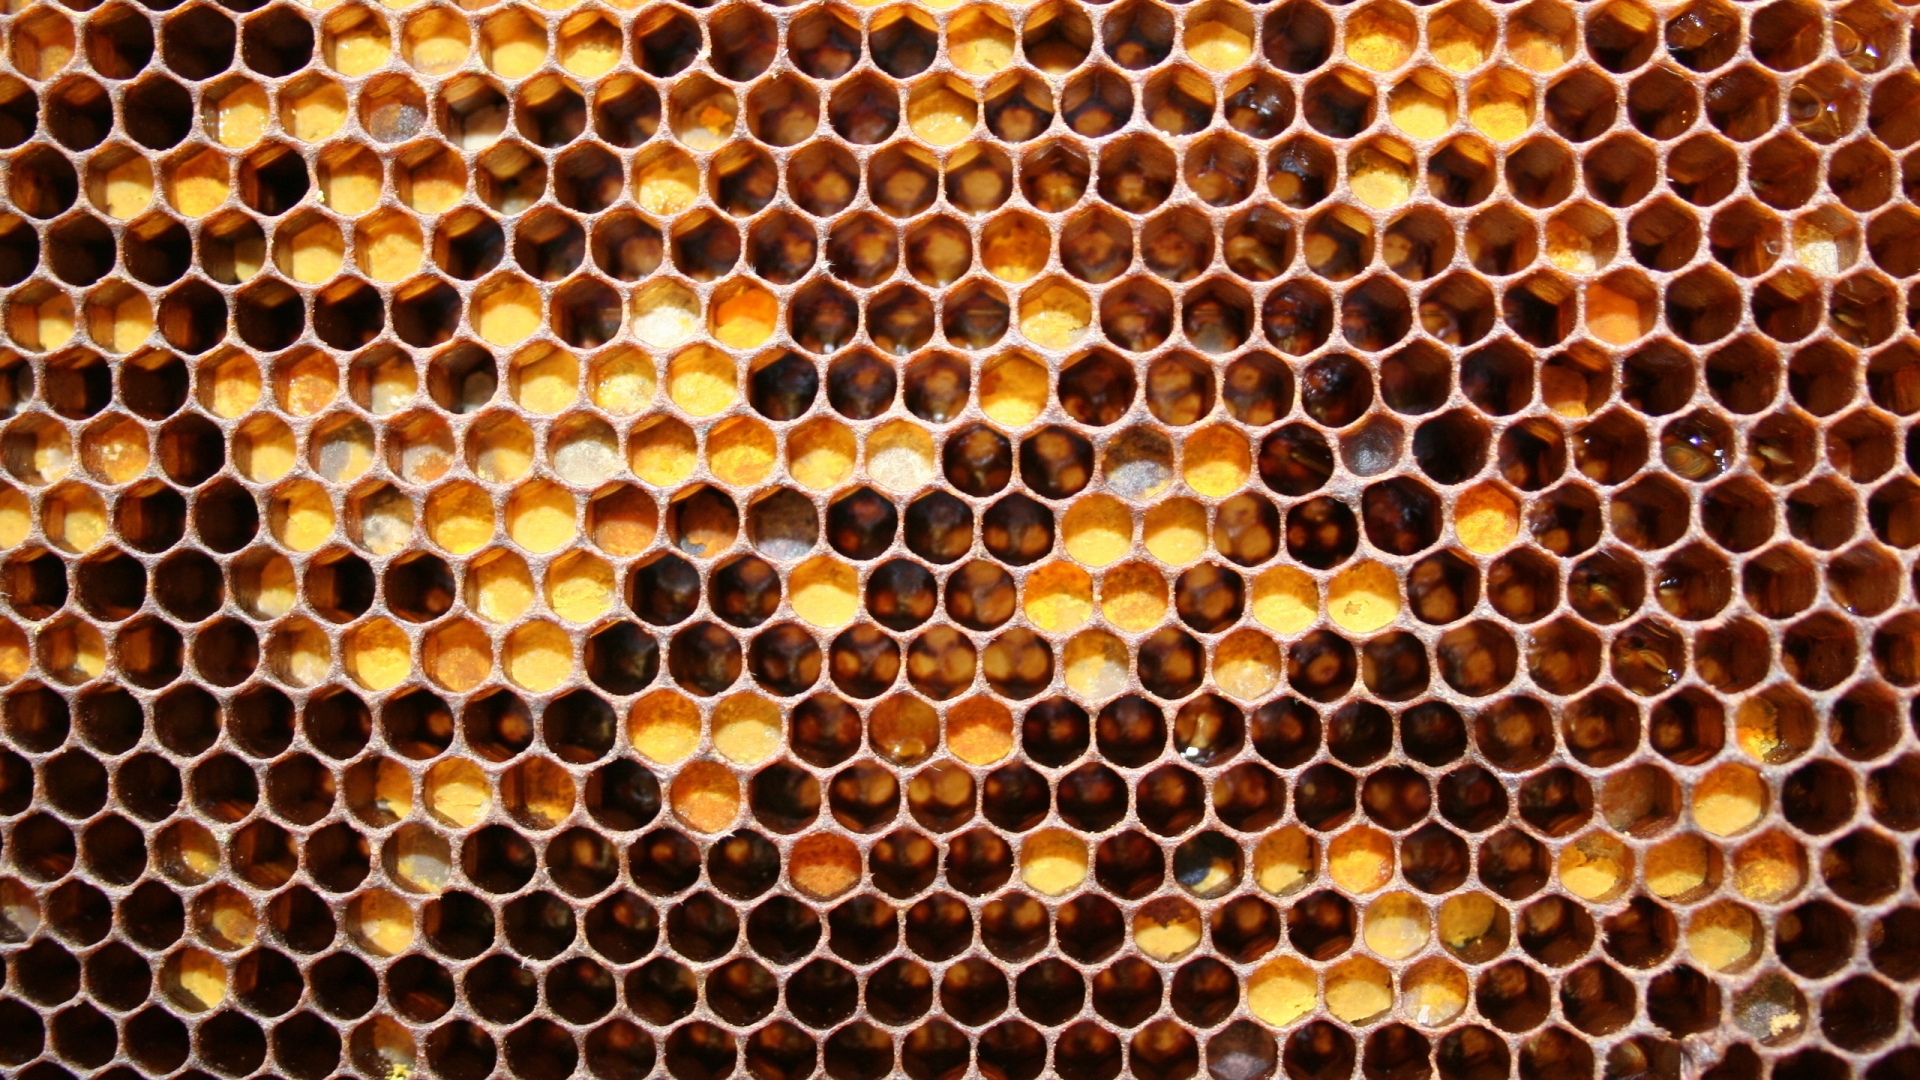 Bee Honeycomb for 1920 x 1080 HDTV 1080p resolution